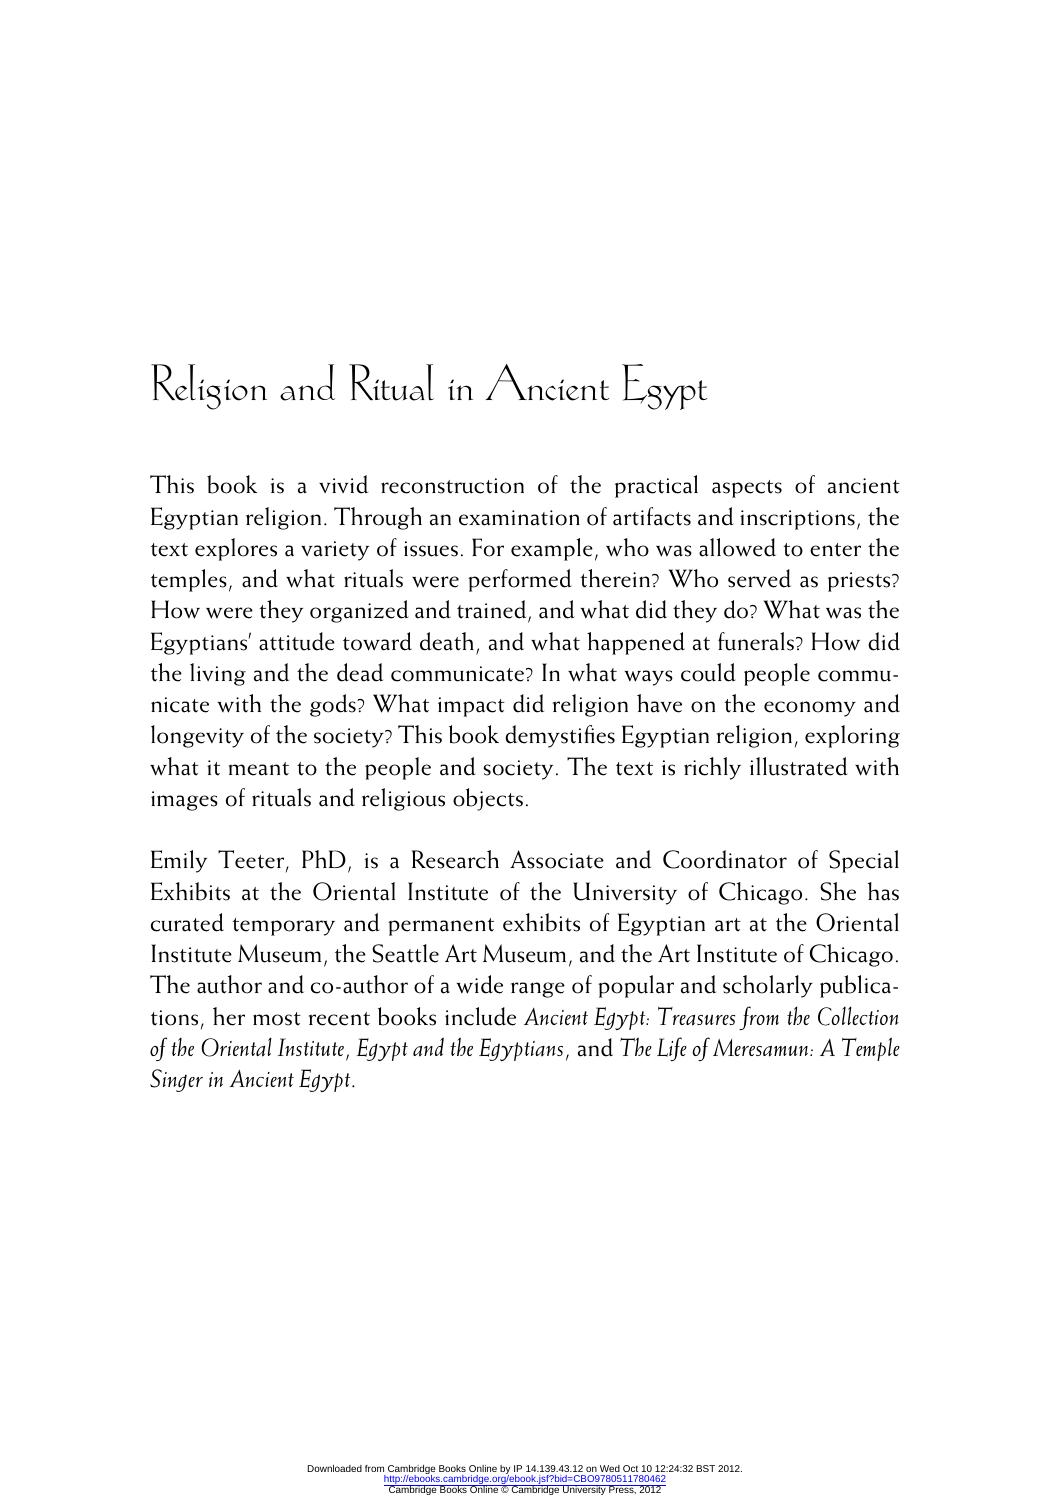 Religion and Ritual in Ancient Egypt by Emily Teeter